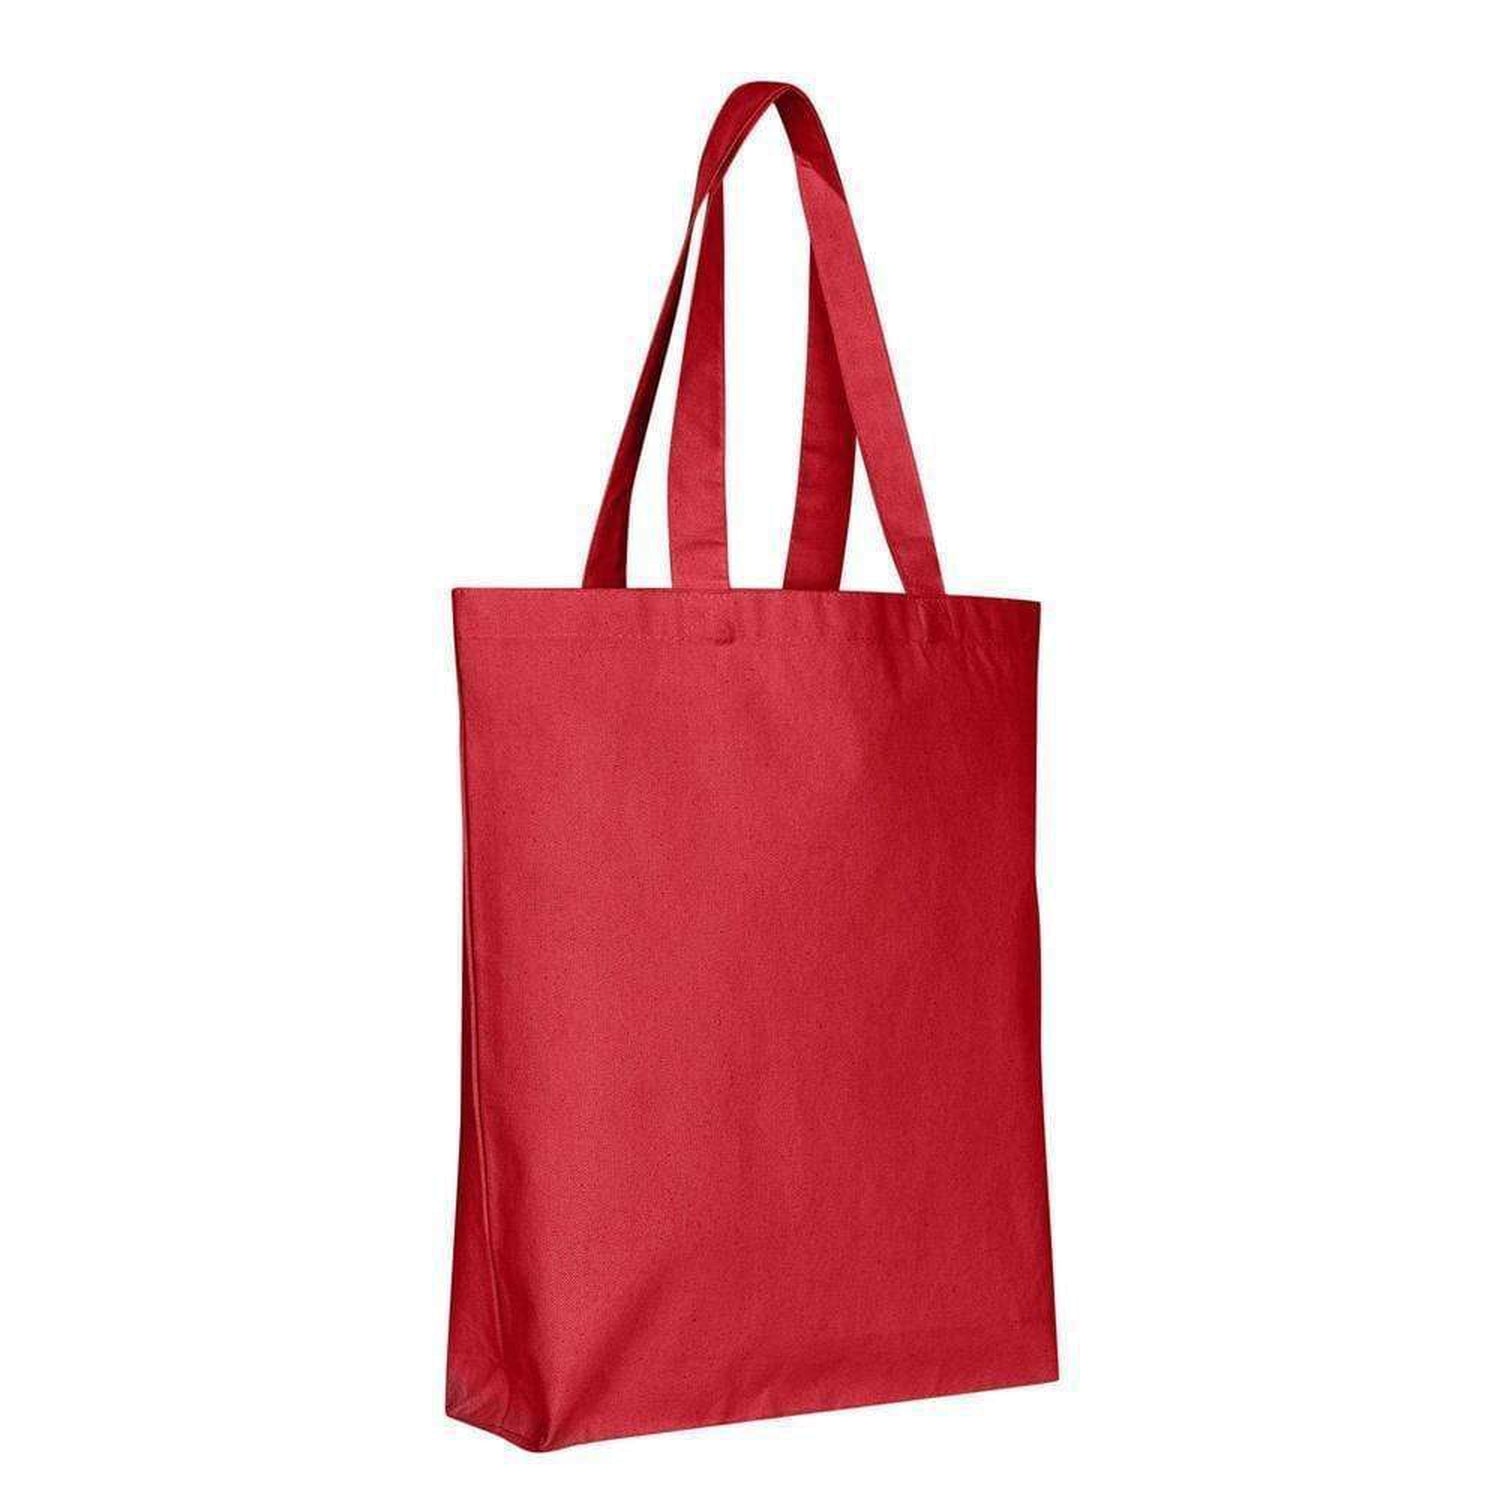 Canvas Tote Bags in Bulk, Bottom Gusset Cotton Tote Bags - Set of 12 – BagzDepot™